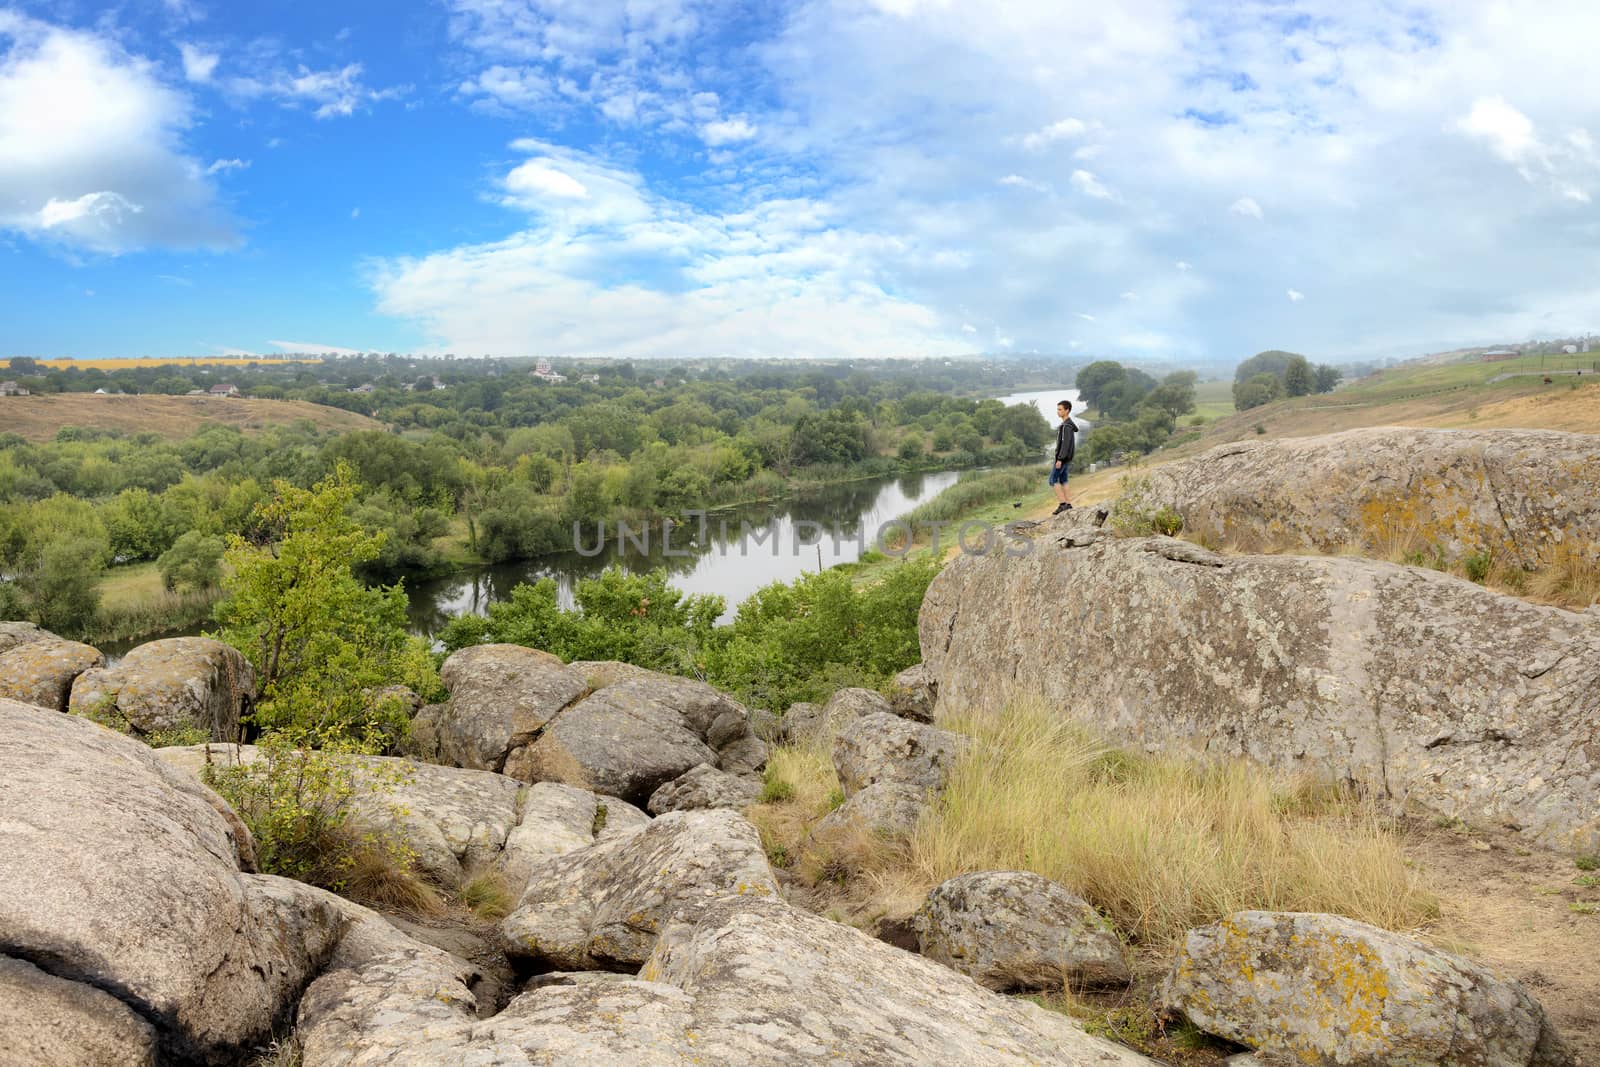 The teenager stands on top of a large stone boulder on the bank of the Southern Bug River and looks at the river below by Sergii